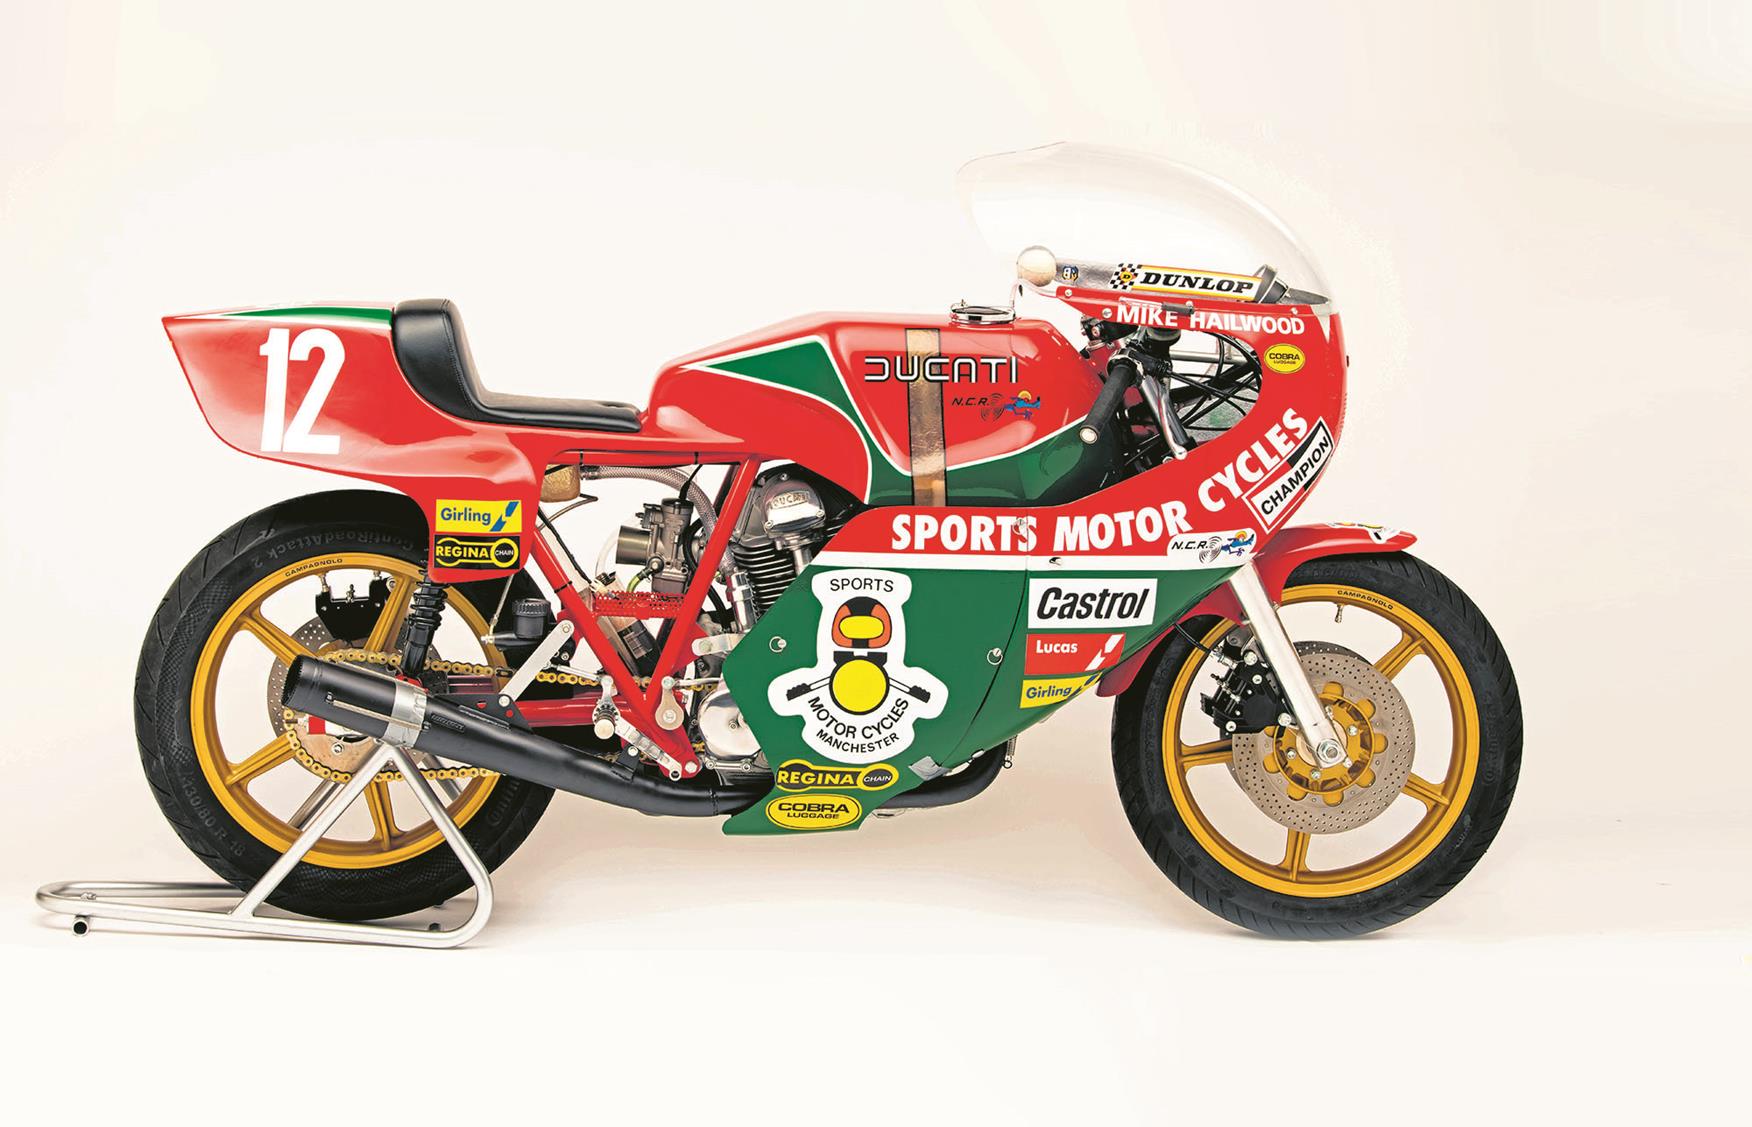 Ducati Give Blessing For 1978 Hailwood Replicas Mcn